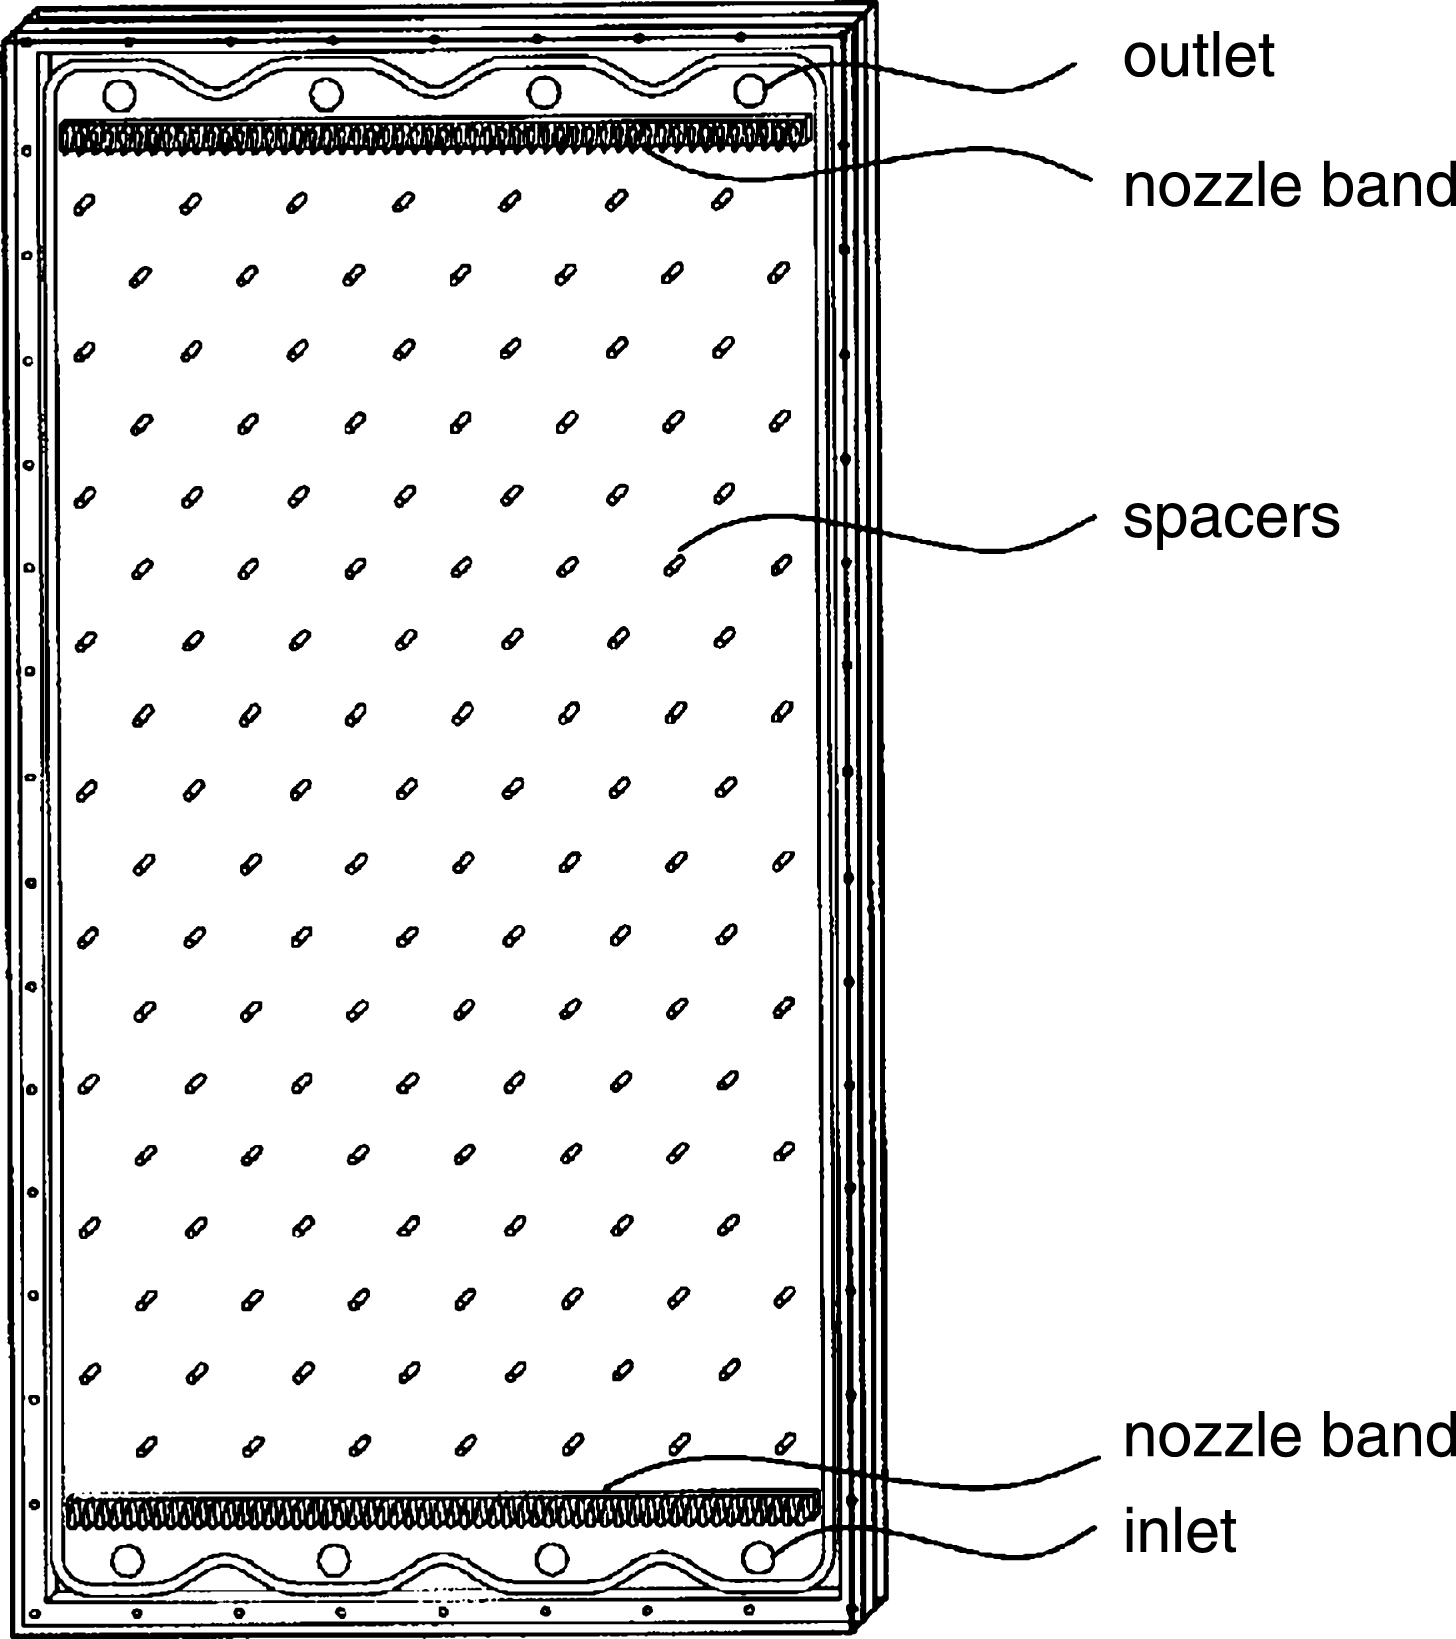 Section of the currently considered components of Fluidglass, showing the nozzle bands at top and bottom, four inlets and four outlets and the required spacers to keep the distance between the pane of glasses.